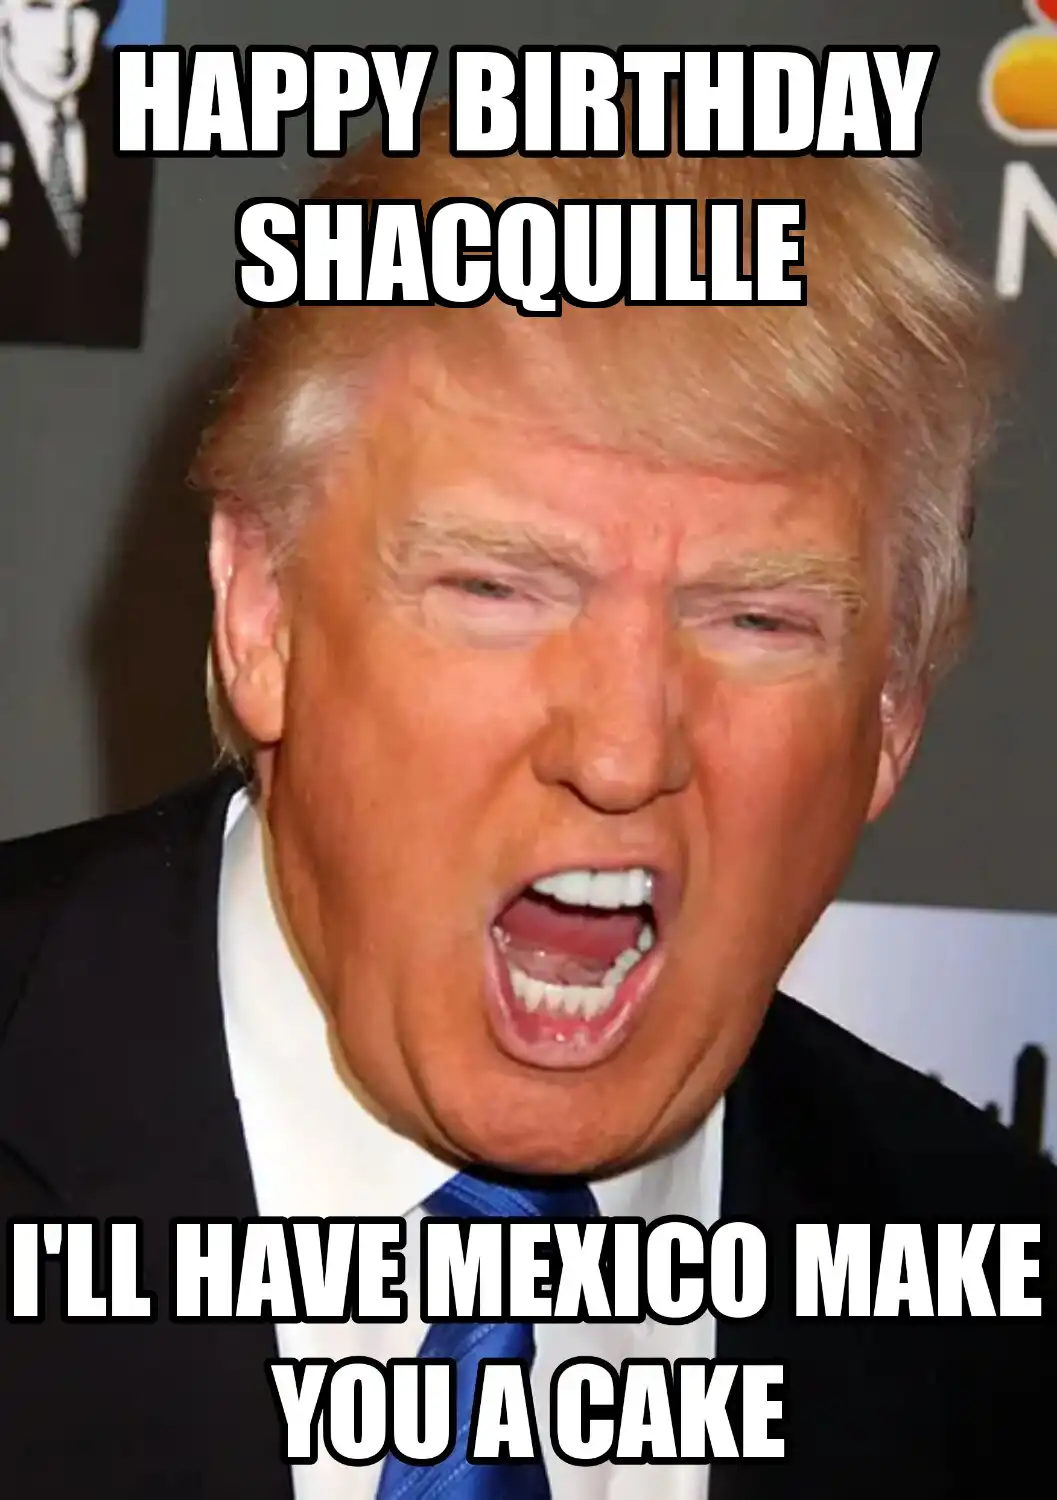 Happy Birthday Shacquille Mexico Make You A Cake Meme